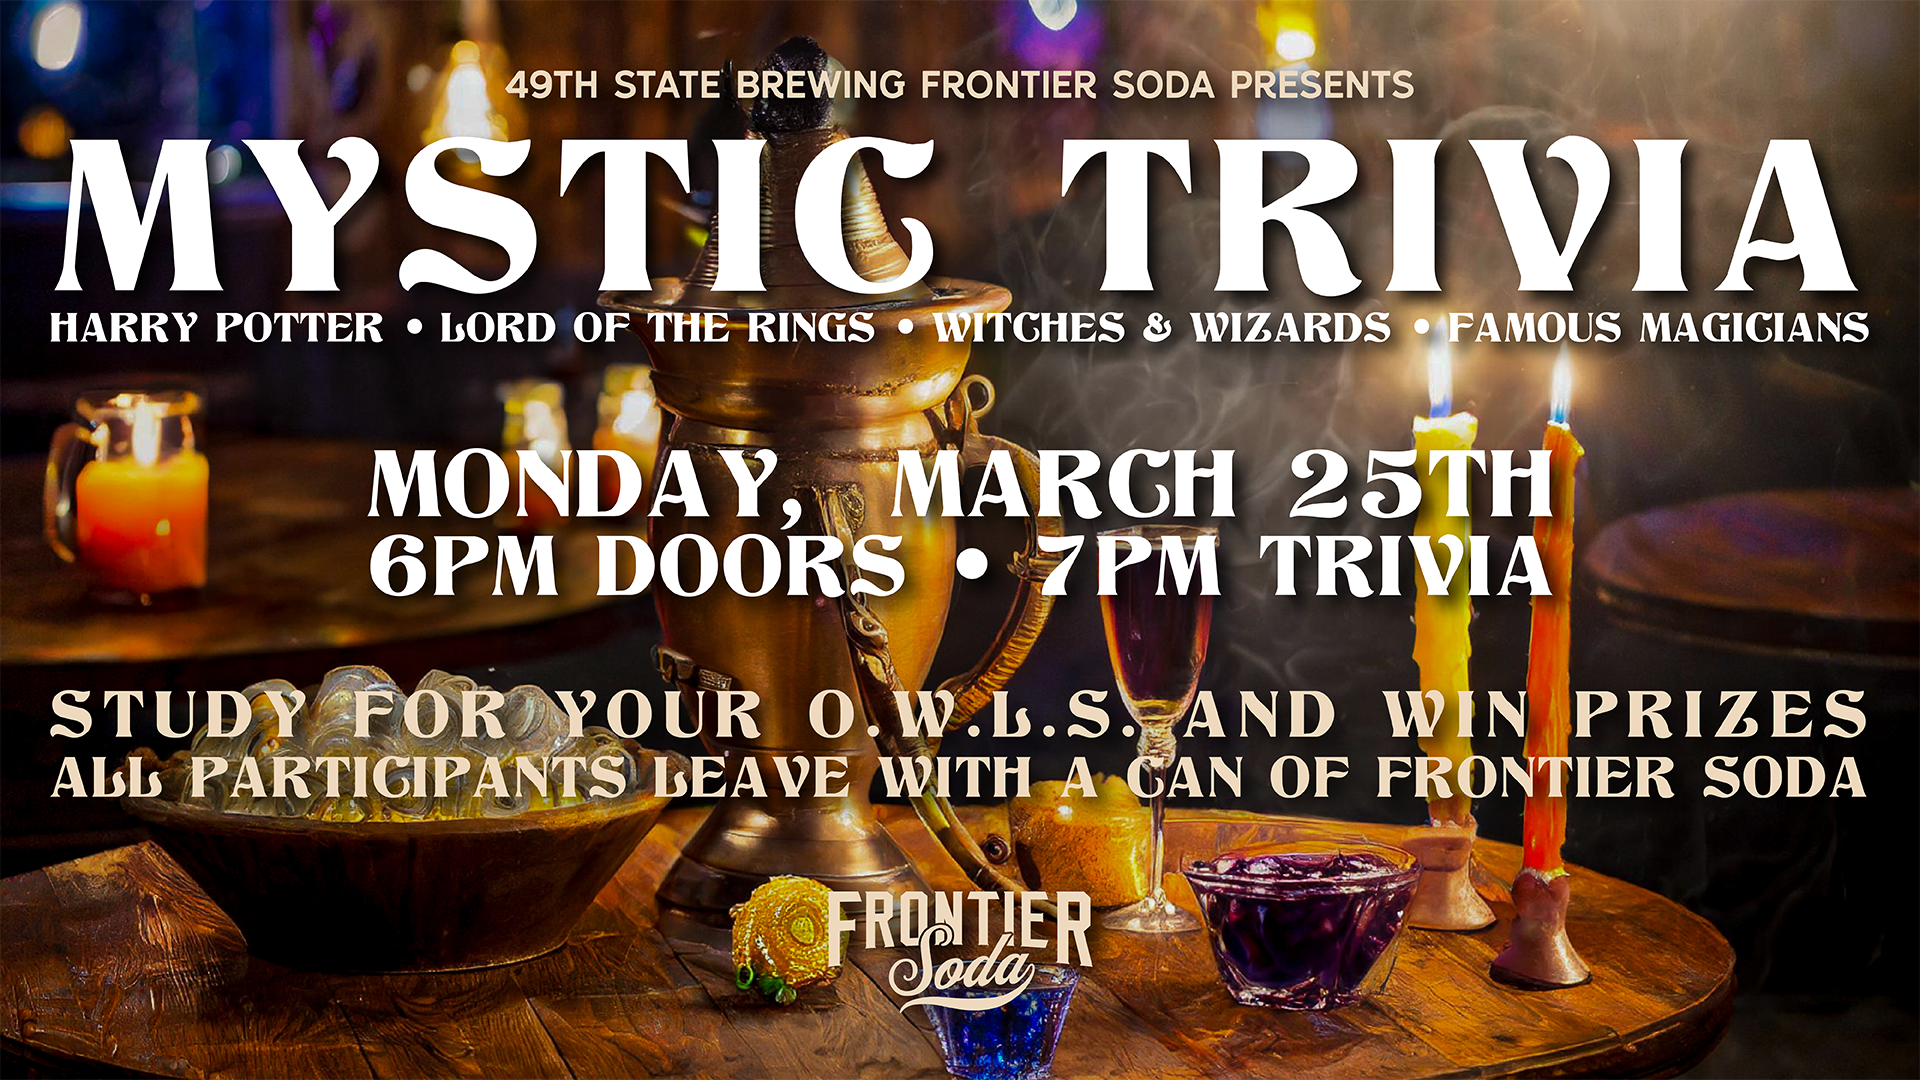 49thState, 49thStateBrewing, harrypotter, lordoftherings , Trivia, trivianight, downtownanchorage, craftbeer, magic